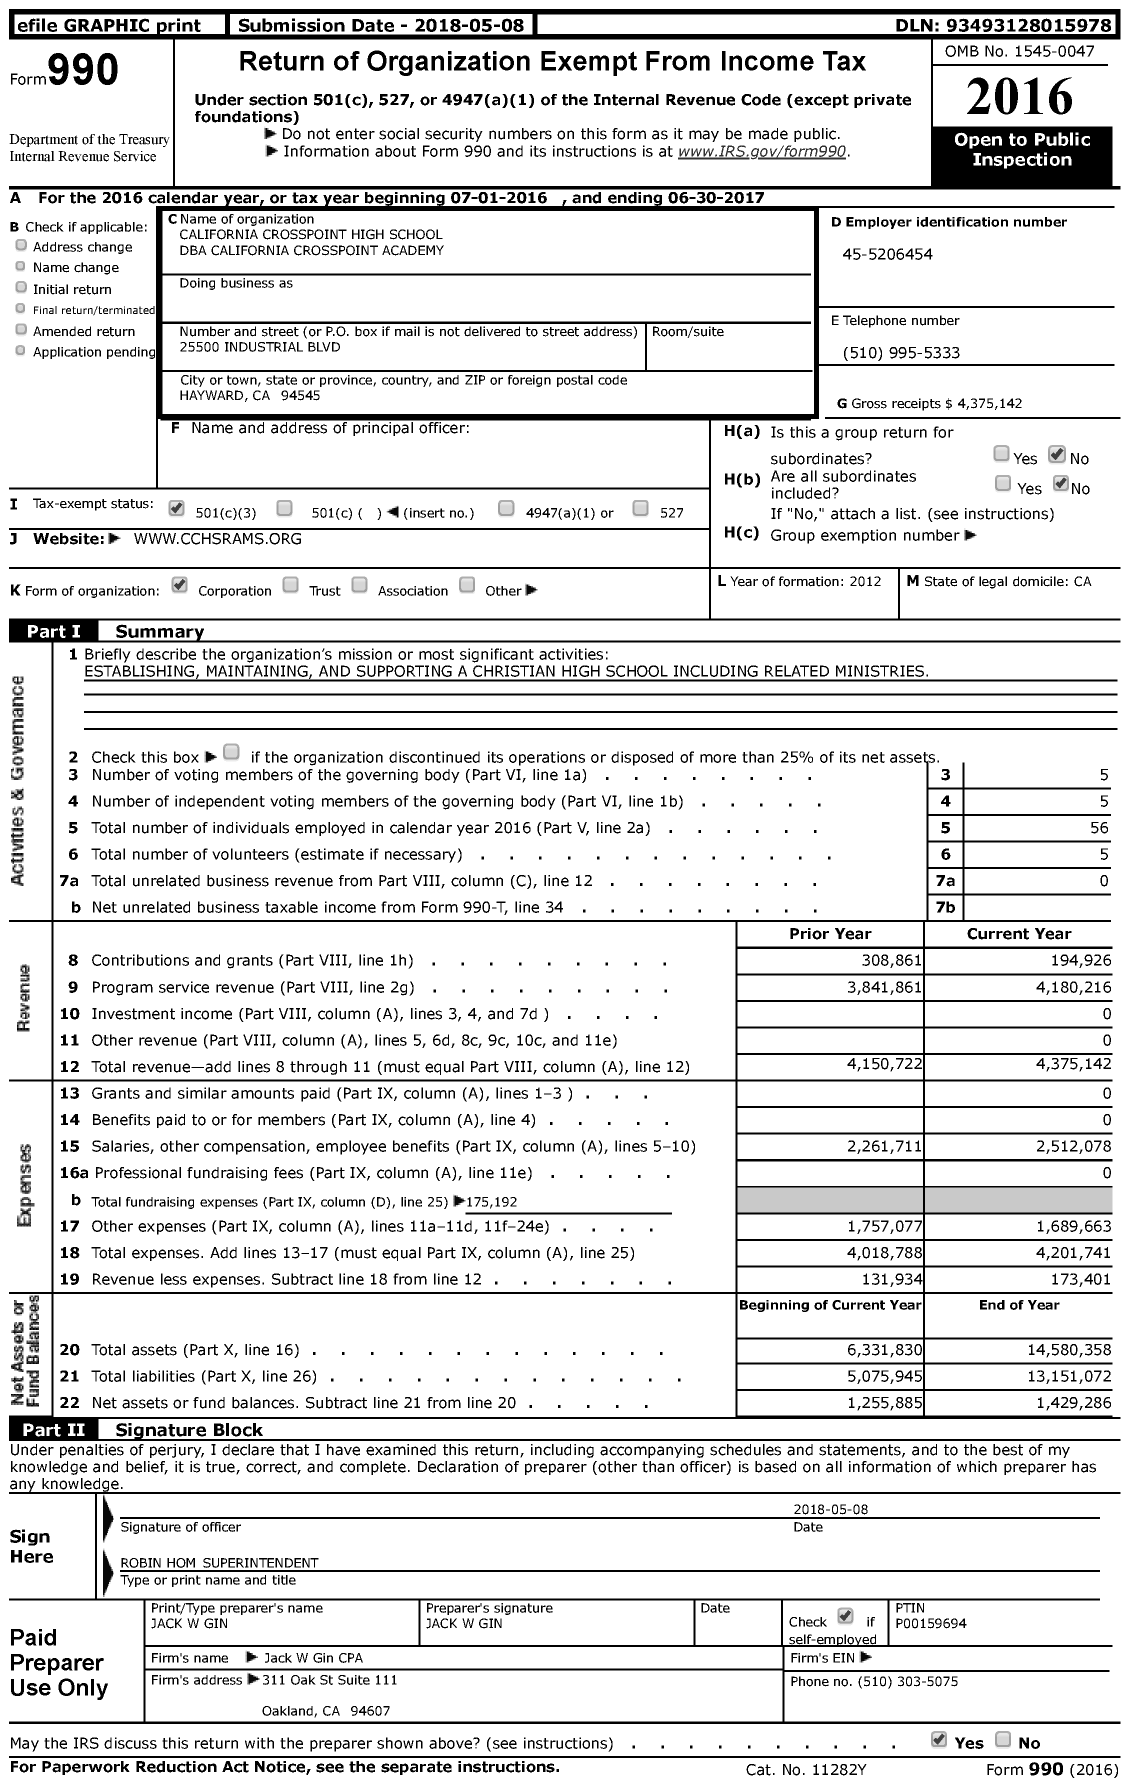 Image of first page of 2016 Form 990 for California Crosspoint High School California Crosspoint Academy (CCHS)